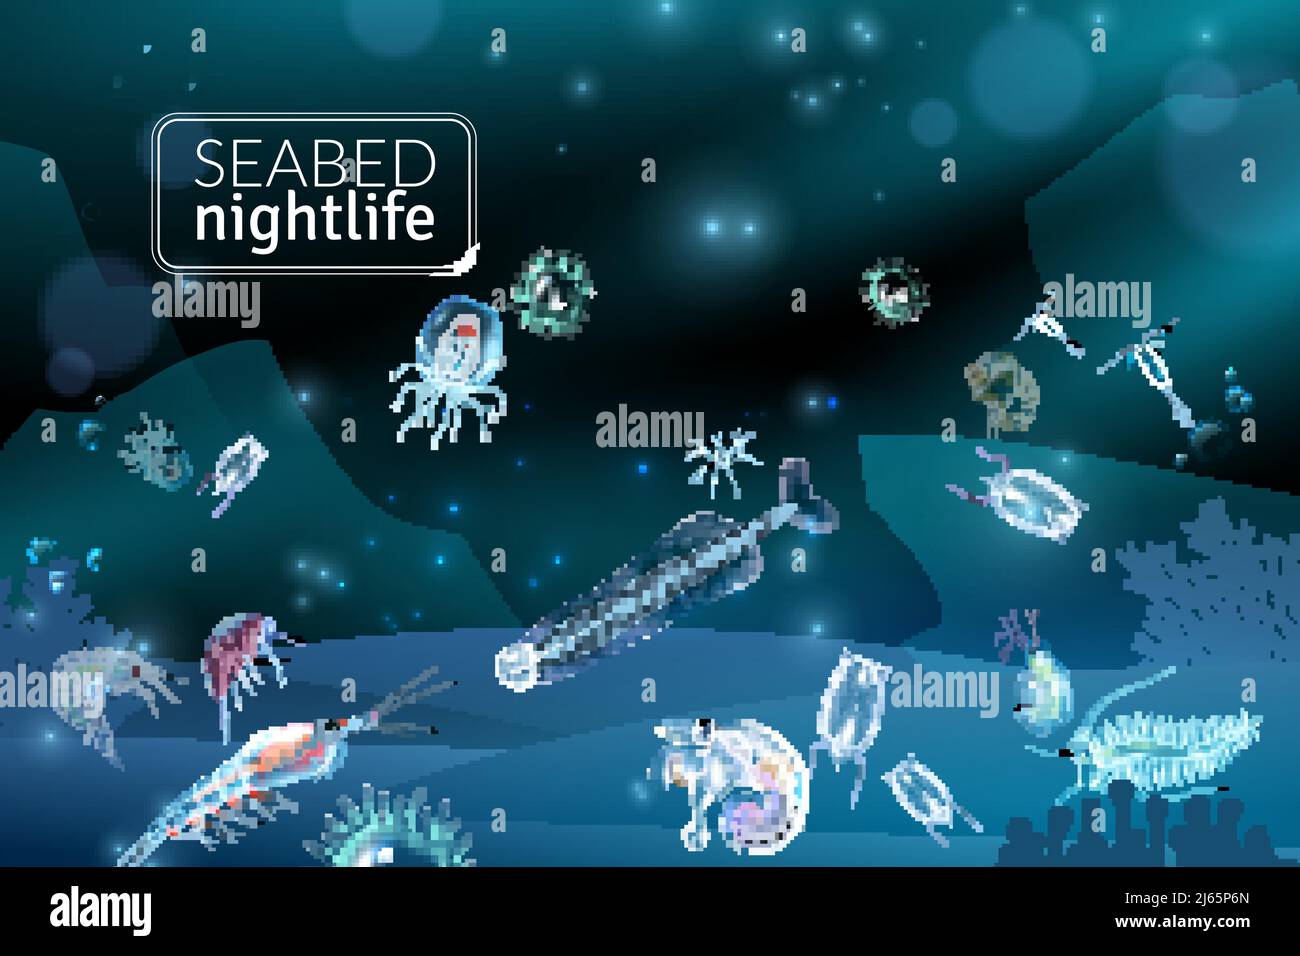 Seabed nightlife underwater scene with reef seaweed coral and plankton characters cartoon vector illustration Stock Vector